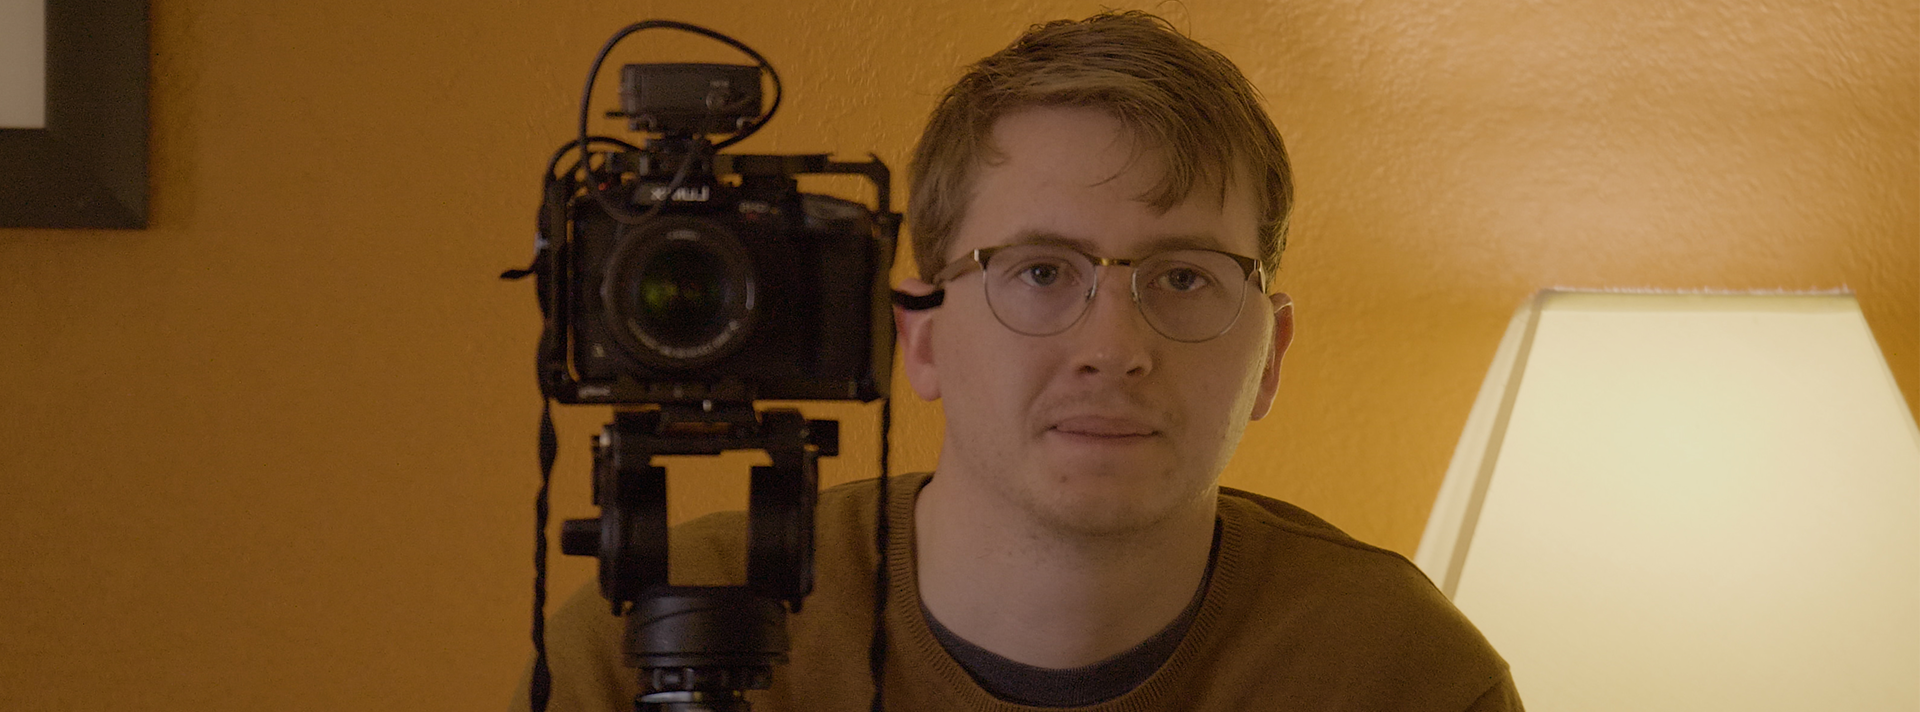 Header Image Filmmaker Nick Beaulieu looks in the camera direction while sitting next to a camera on a tripod